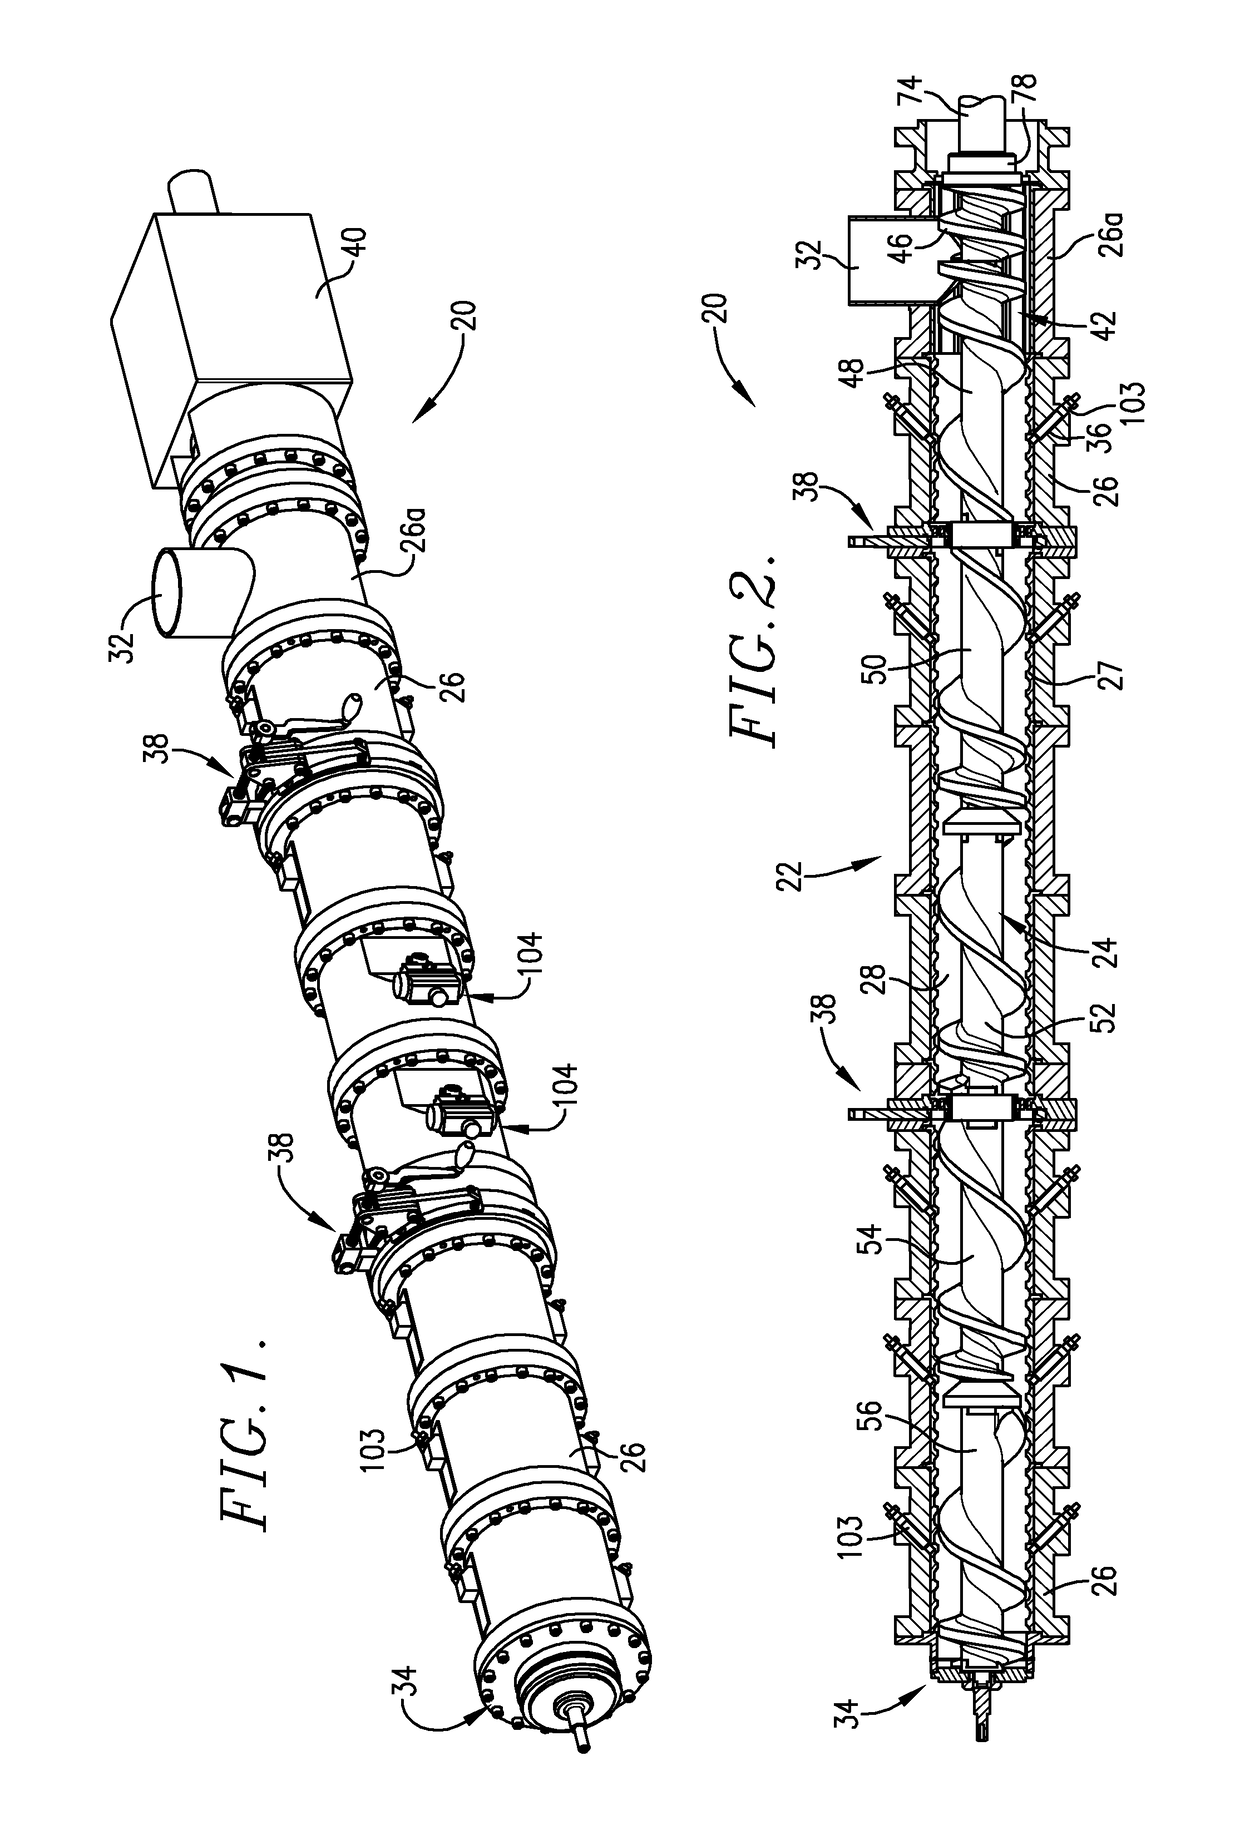 Method and apparatus for extrusion processing of high fiber content foods